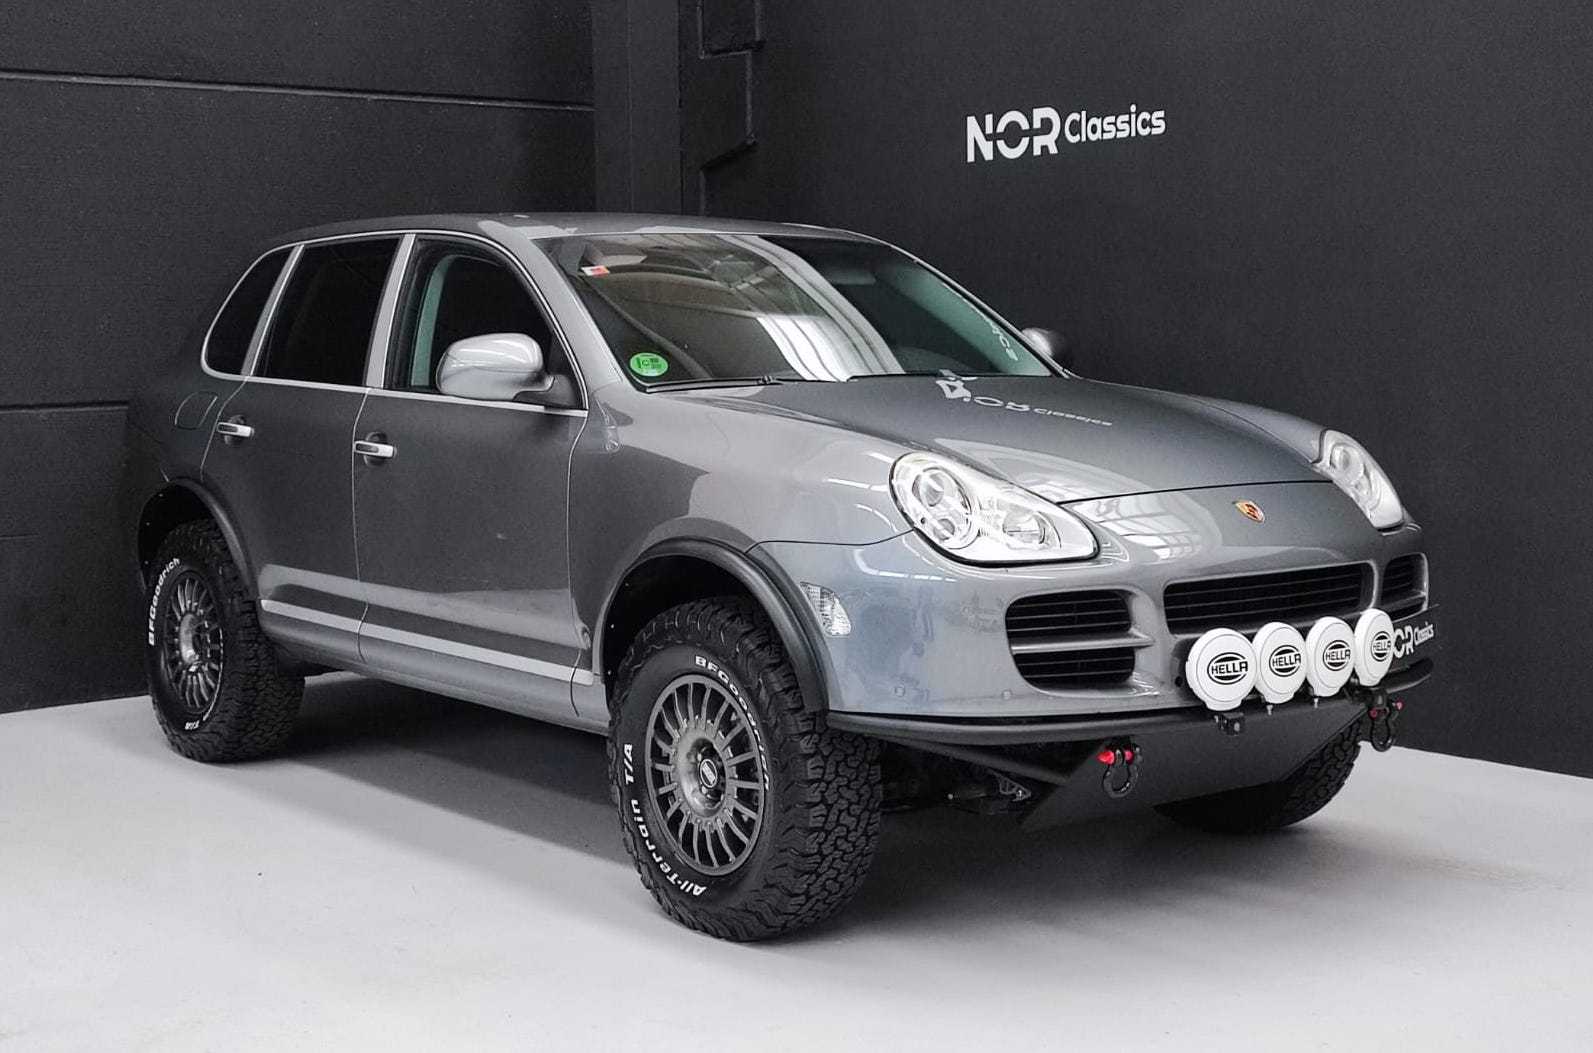 Porsche Cayenne “off-road” project Reserved